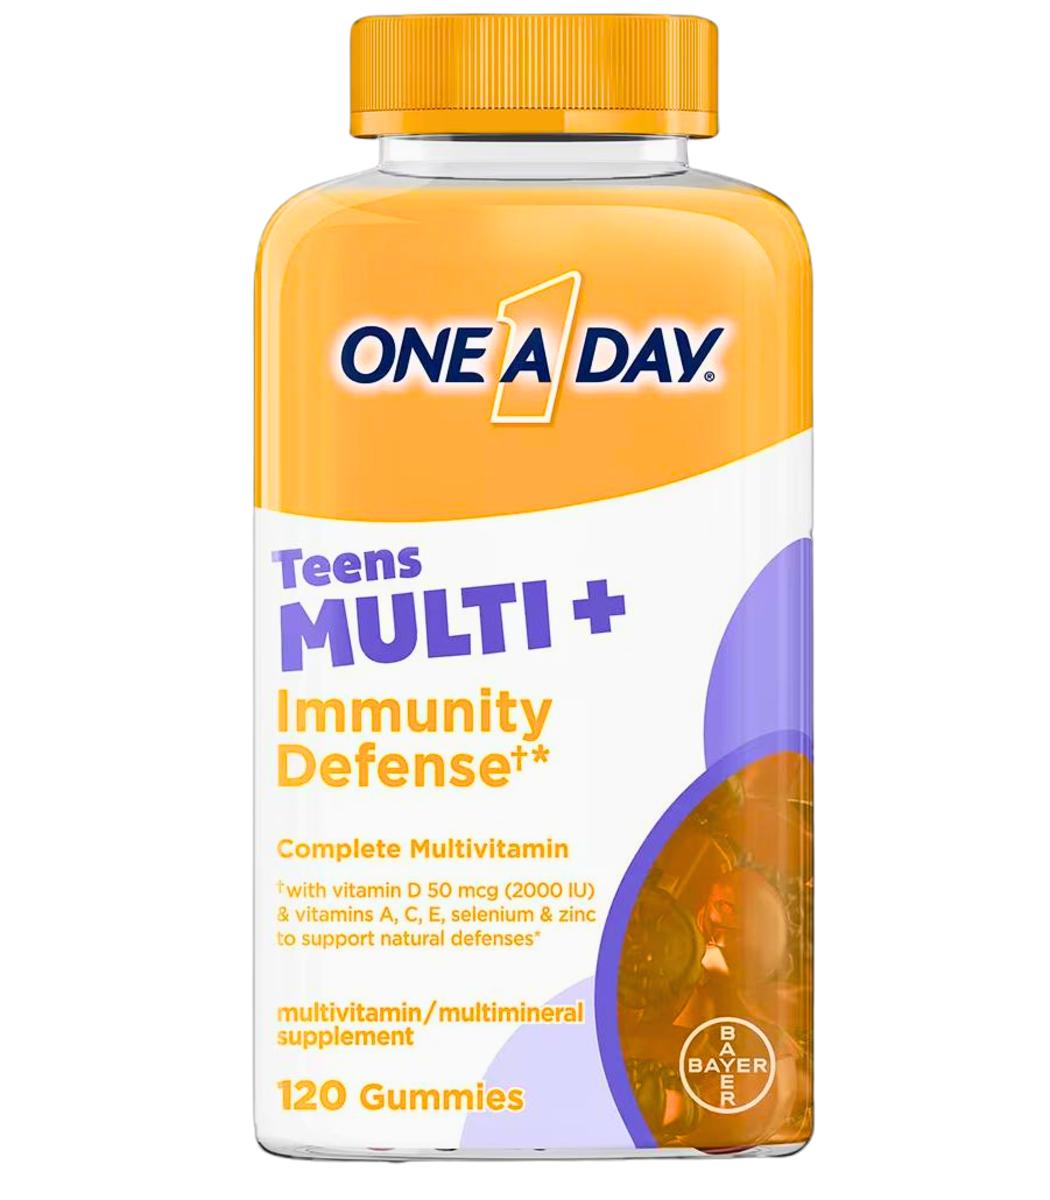 A bottle of One A Day Teens Multi+ Immunity Defense, a multivitamin for teens.